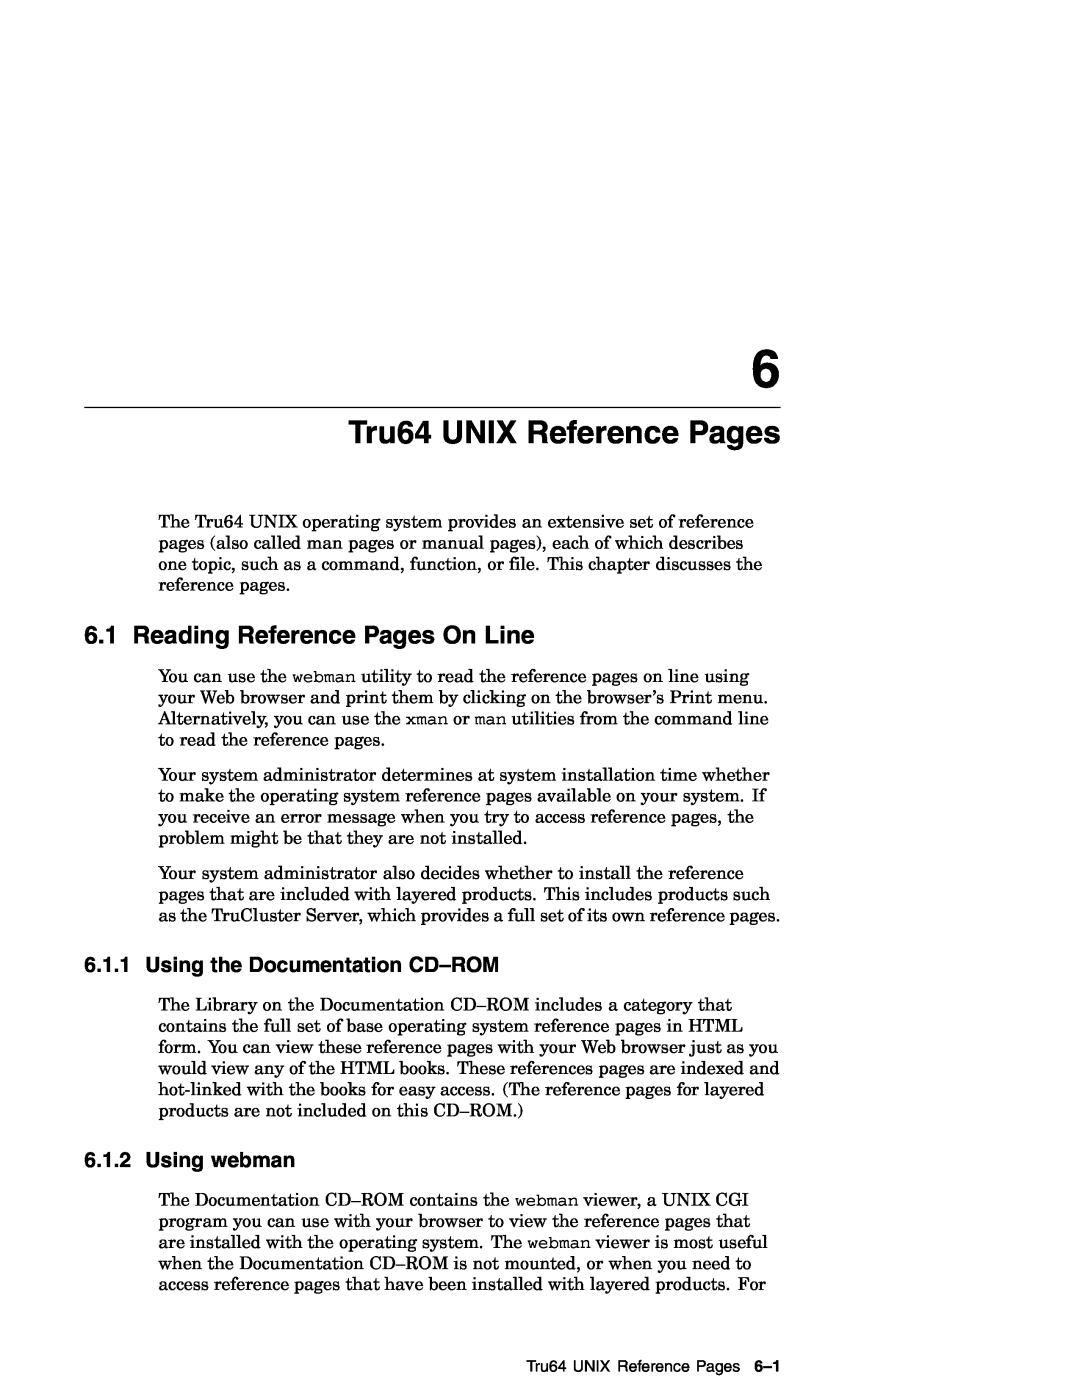 Compaq AA-RH8RD-TE manual Tru64 UNIX Reference Pages, Reading Reference Pages On Line, Using the Documentation CD-ROM 